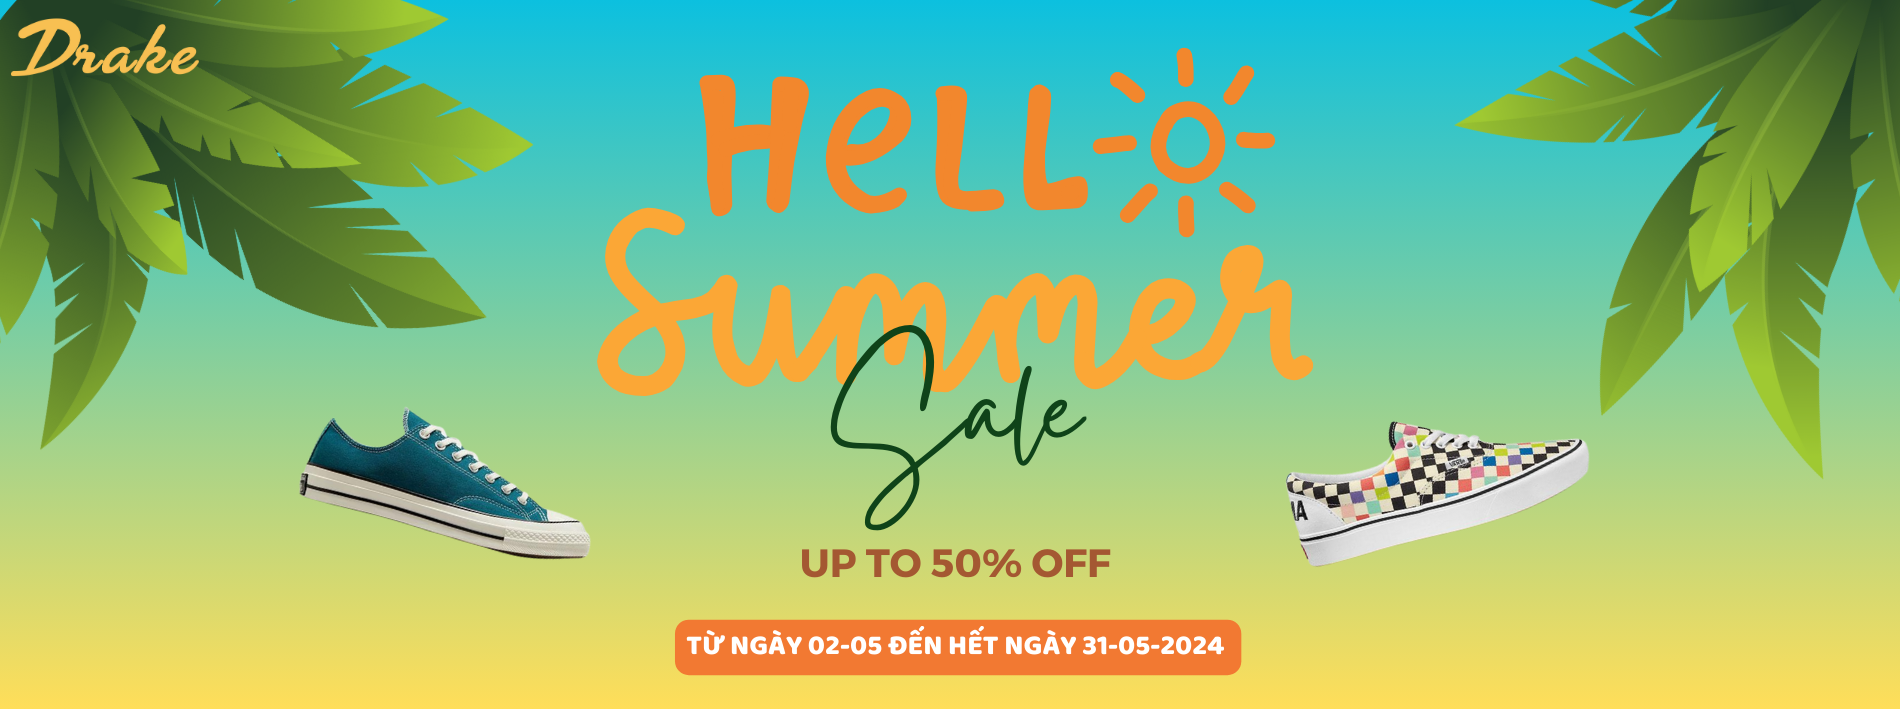 SALE HELLO SUMMER 2024 - DRAKE VN SALE UP TO 50% ALL ITEM